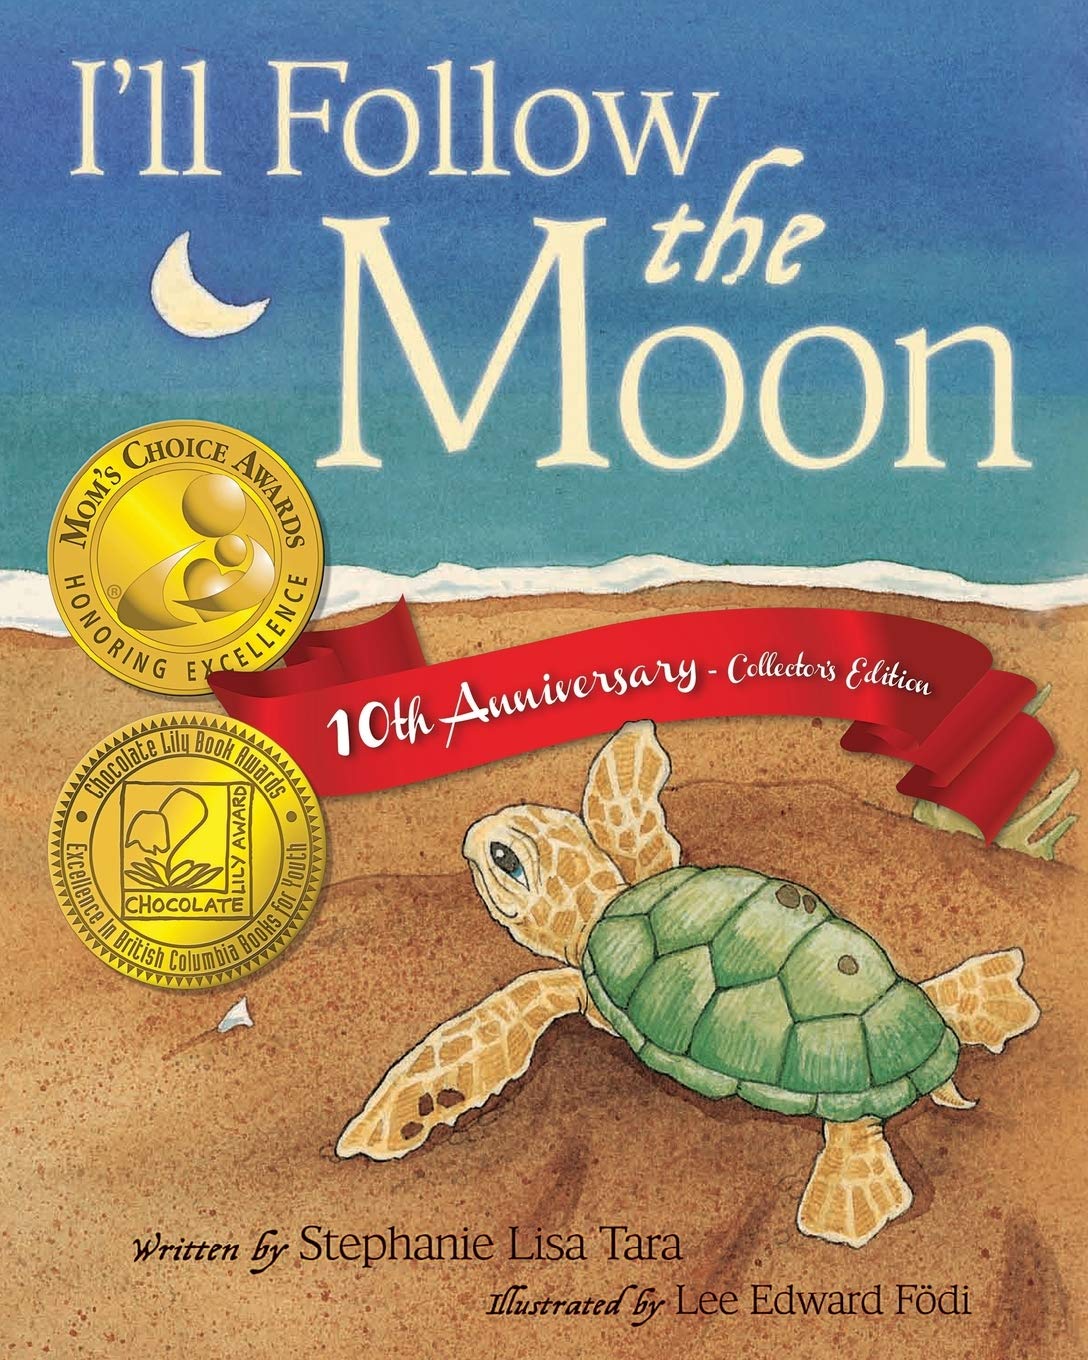 speech and language teaching concepts for I'll Follow the Moon in speech therapy